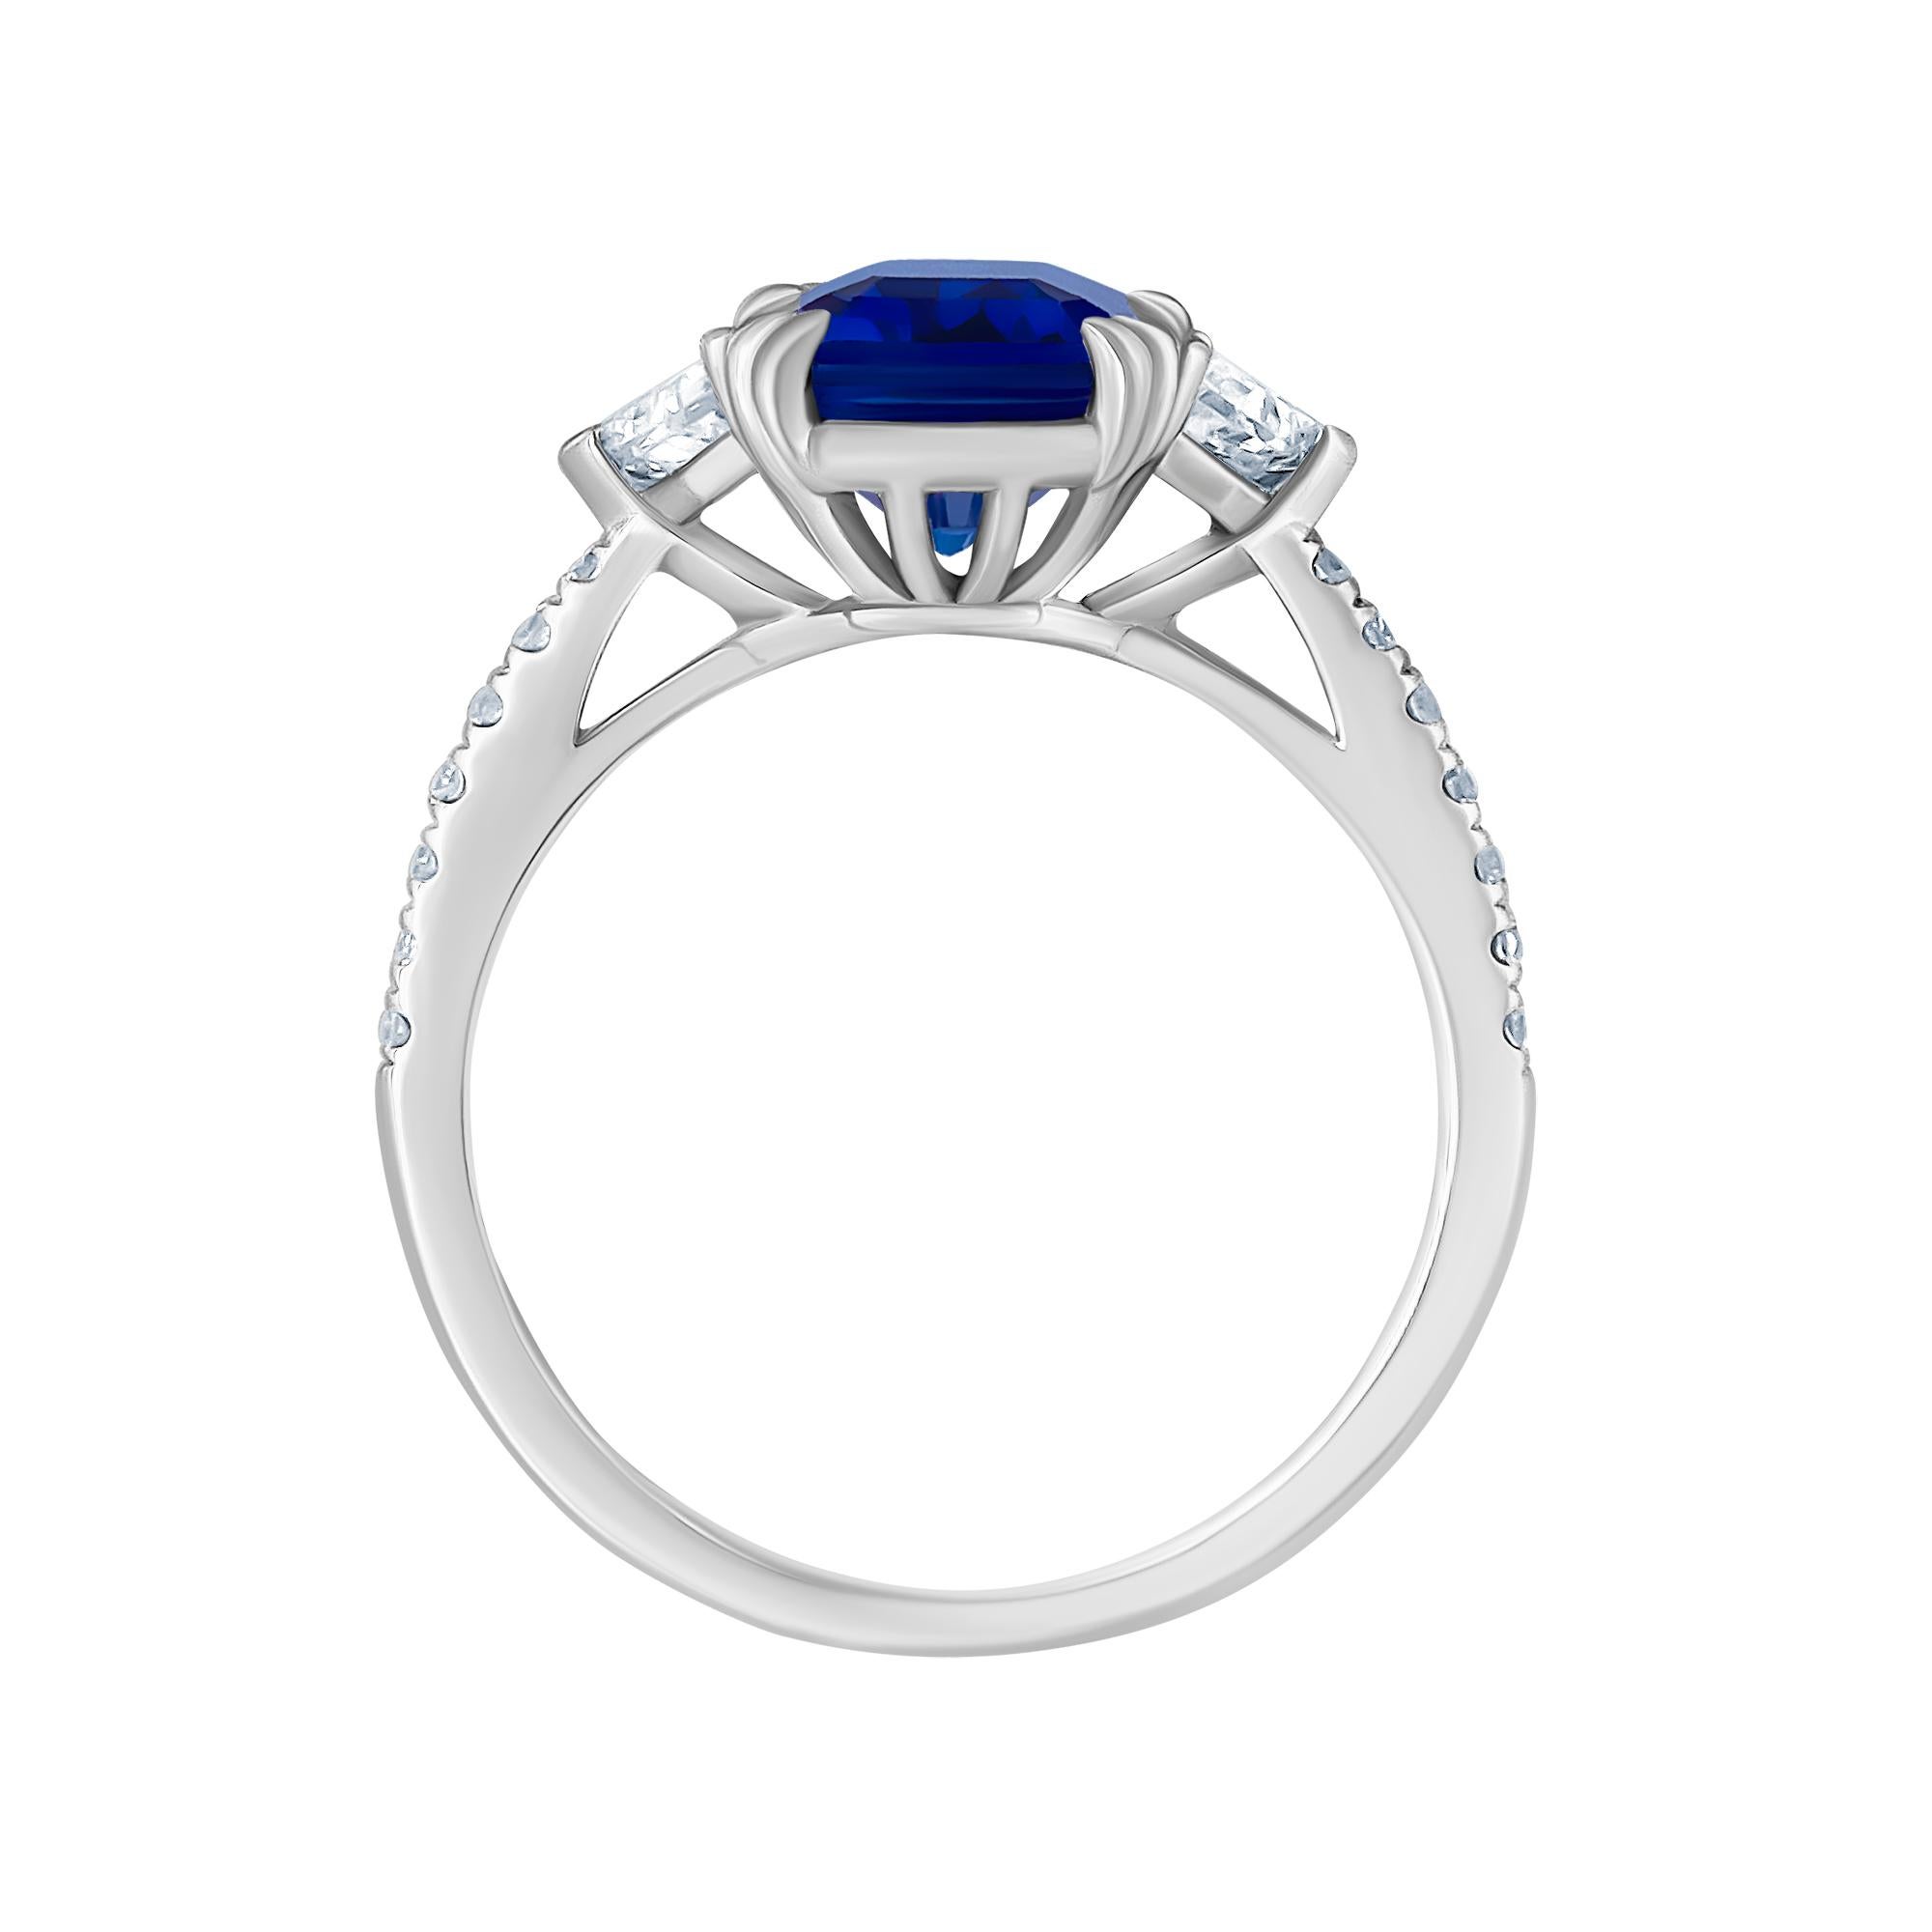 This beautiful Diamond Sapphire ring was crafted in luxurious Platinum. This ring is adorned with a cornflower blue Color; 4.34ct  Emerald Cut ceylon Sapphire. Measuring 10.70x7.50 mm. The side diamonds are Epaulette cut F color vvs2 clarity and